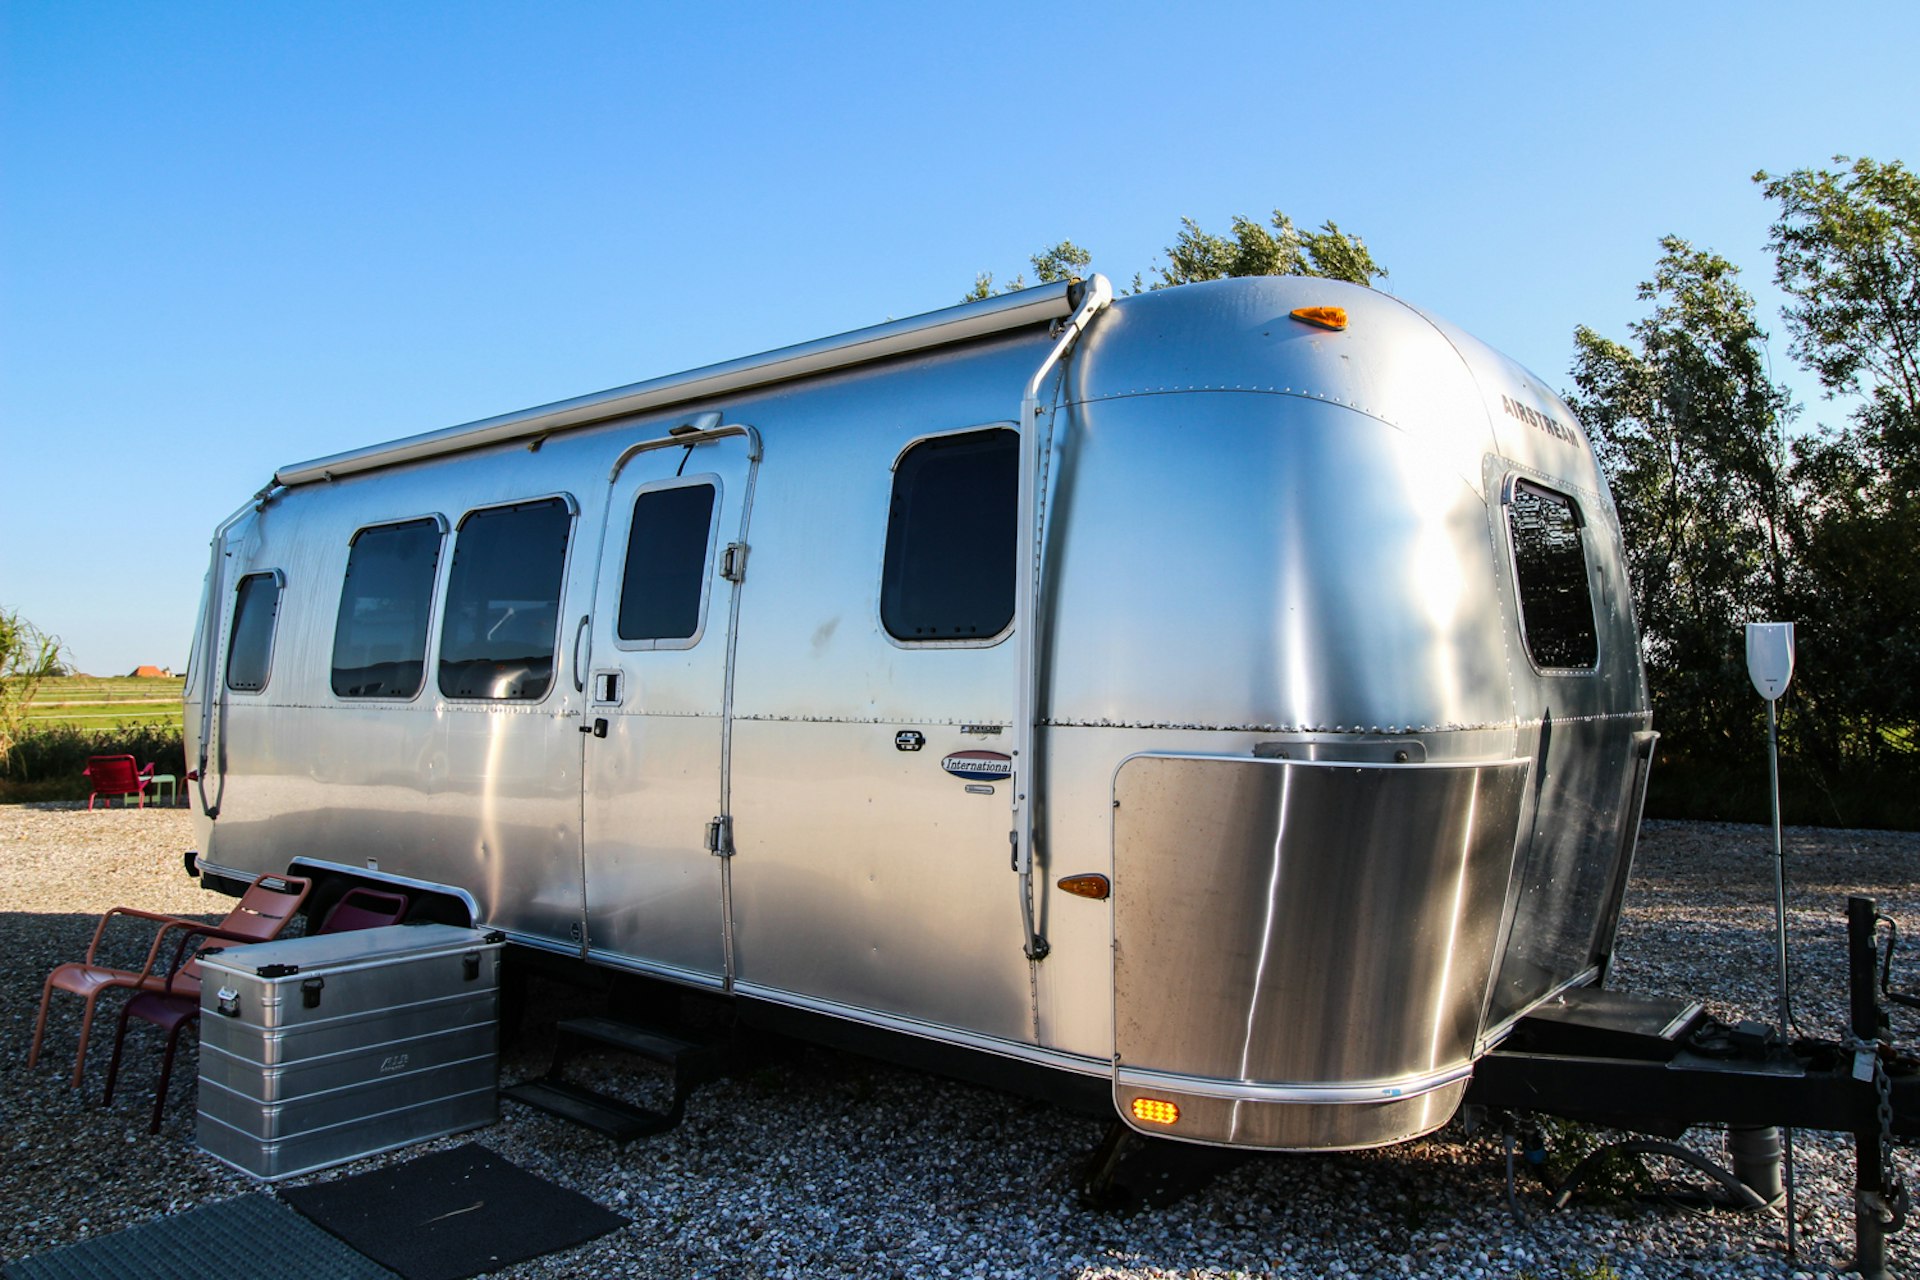 Comfy Airstream trailers await guests at Camp Silver Island Hideaway © Catherine Le Nevez / Lonely Planet